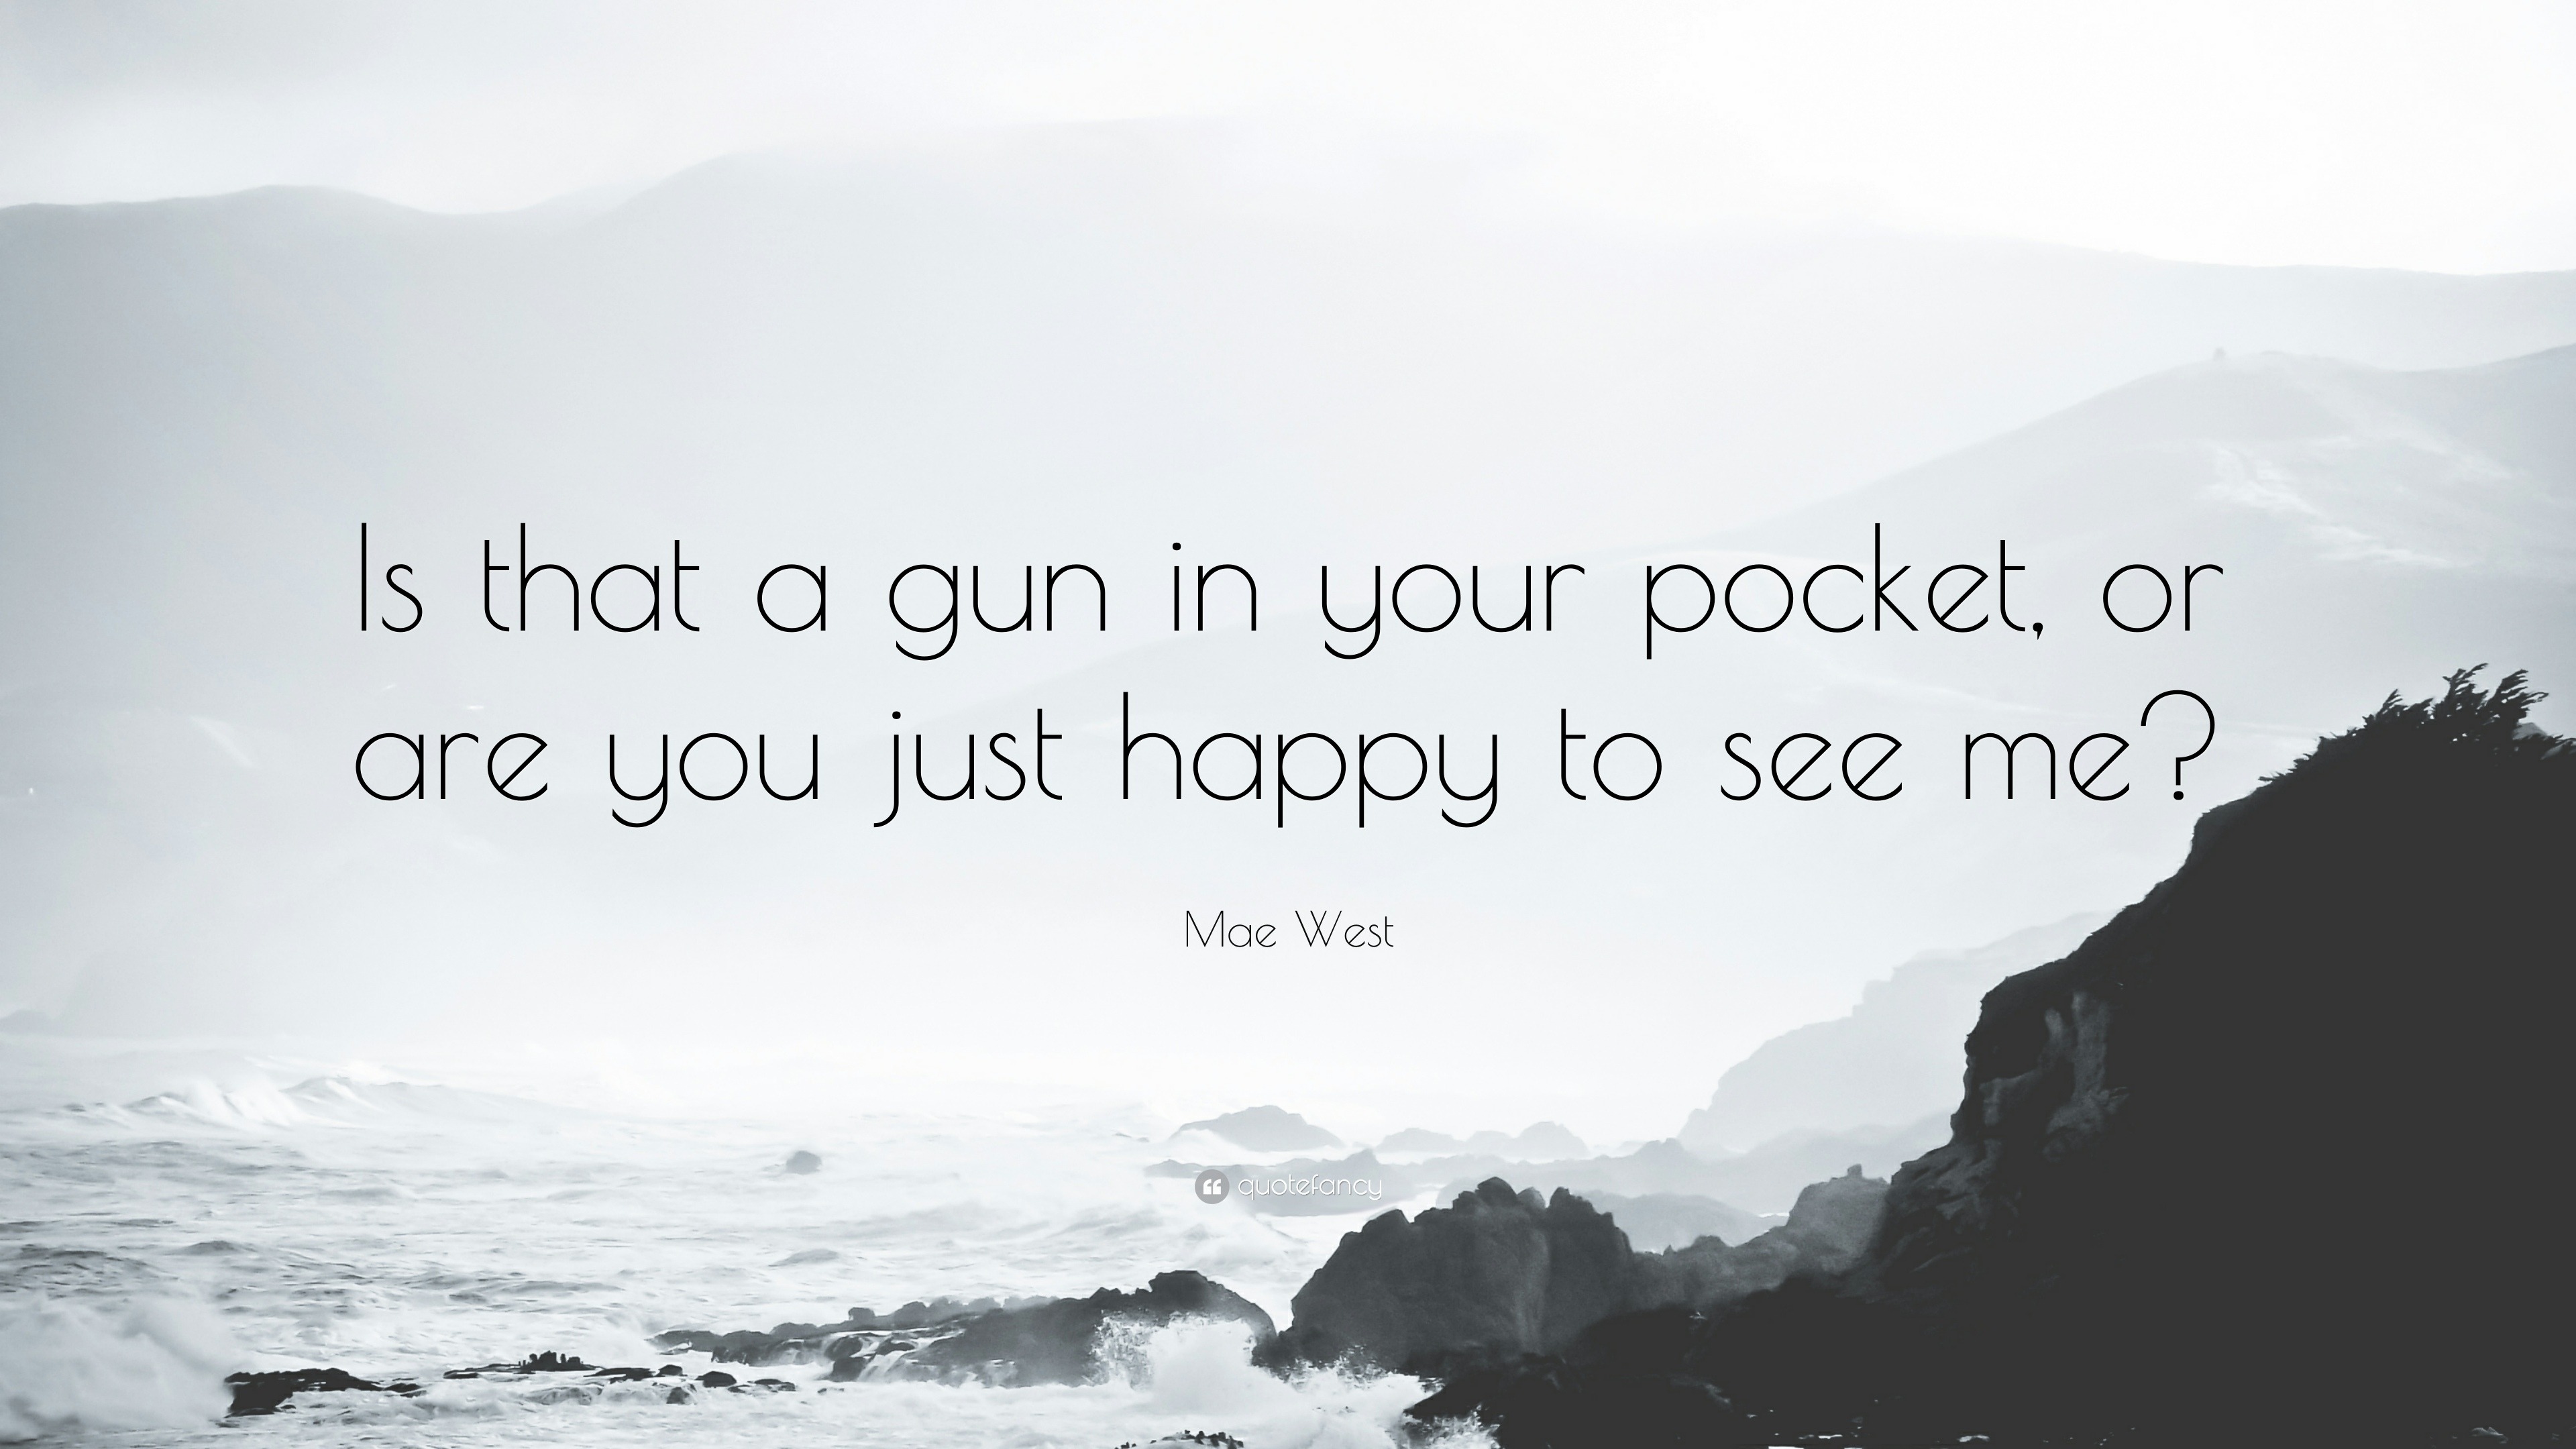 Mae West Quote: “Is that a gun in your pocket, or are you just